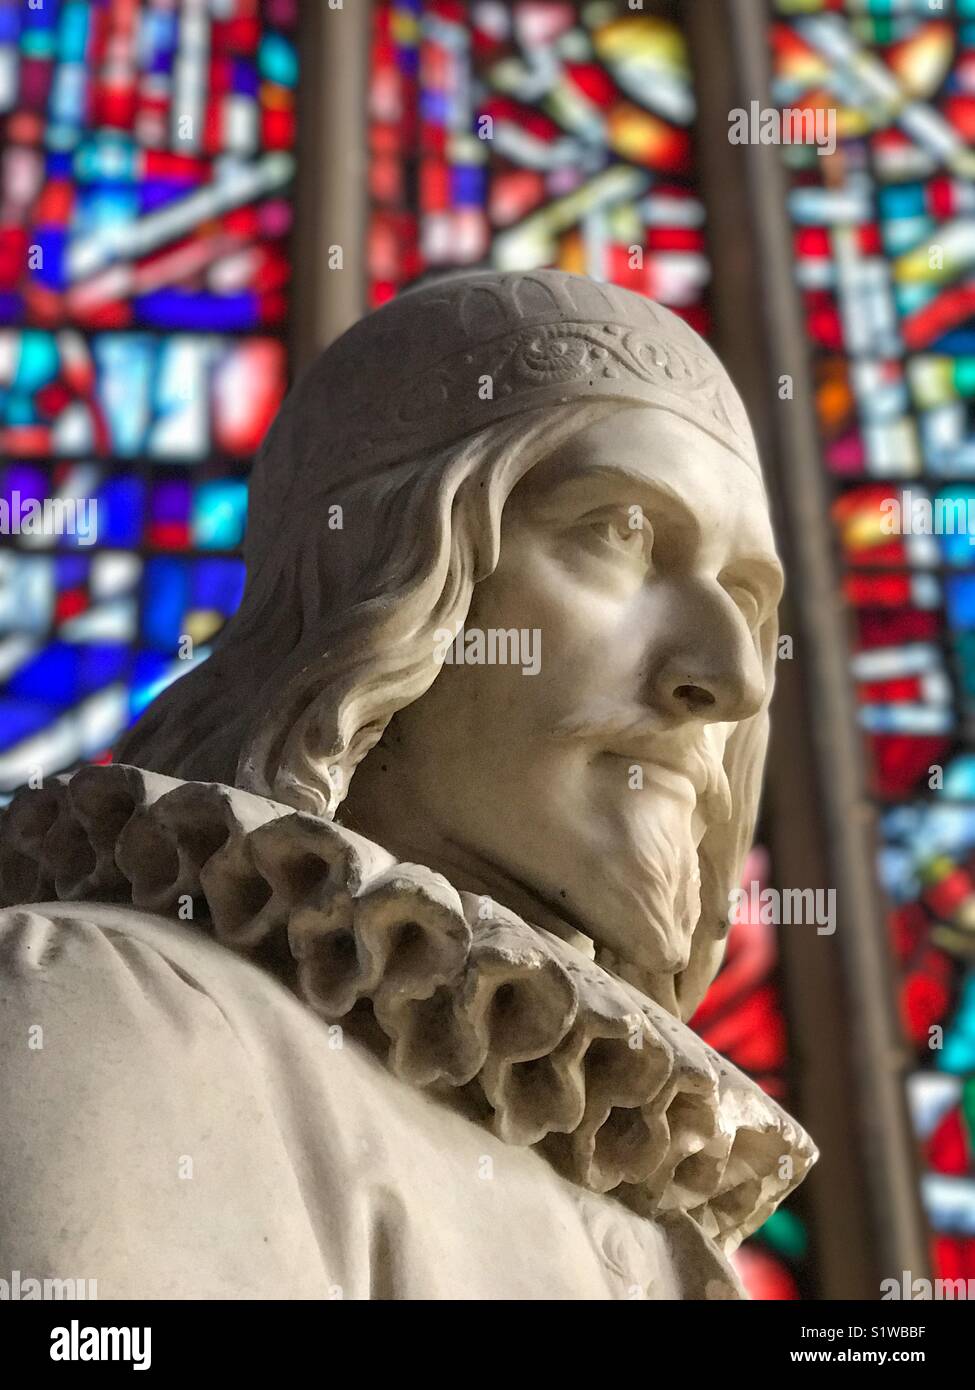 Statue of English historic figure against a stained glass background. Head & shoulder shot. Stock Photo